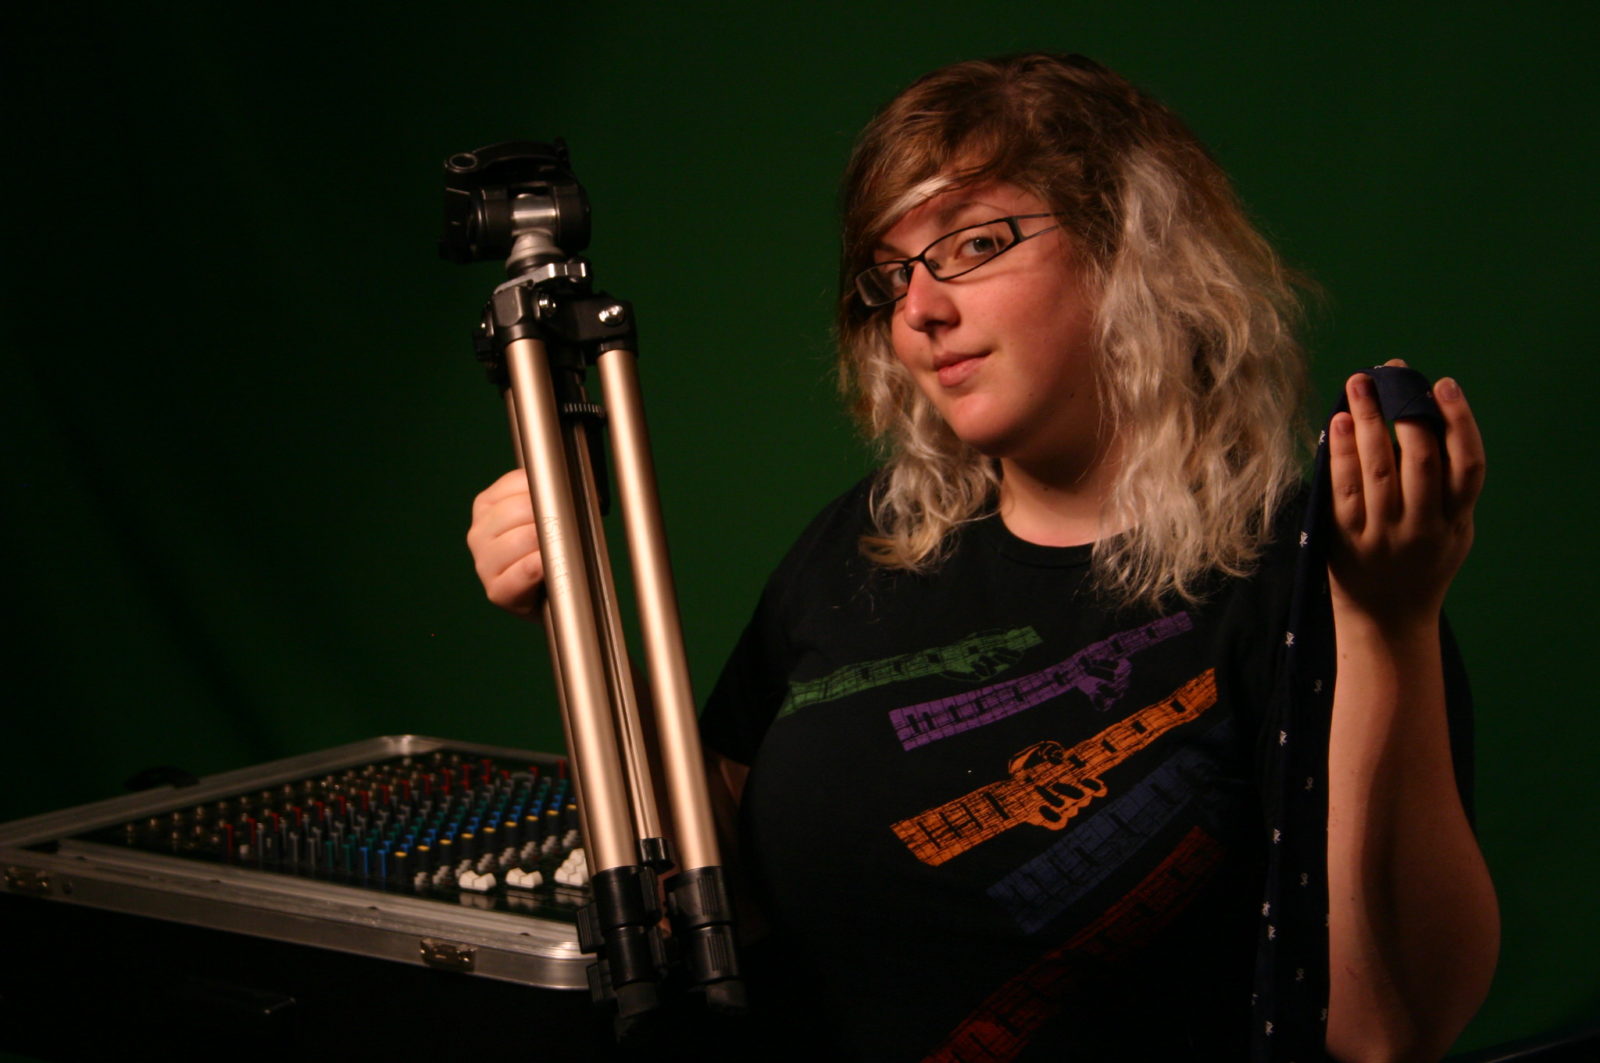 A classmate from Deanna's photography class holds a camera tripod in front of a green backdrop